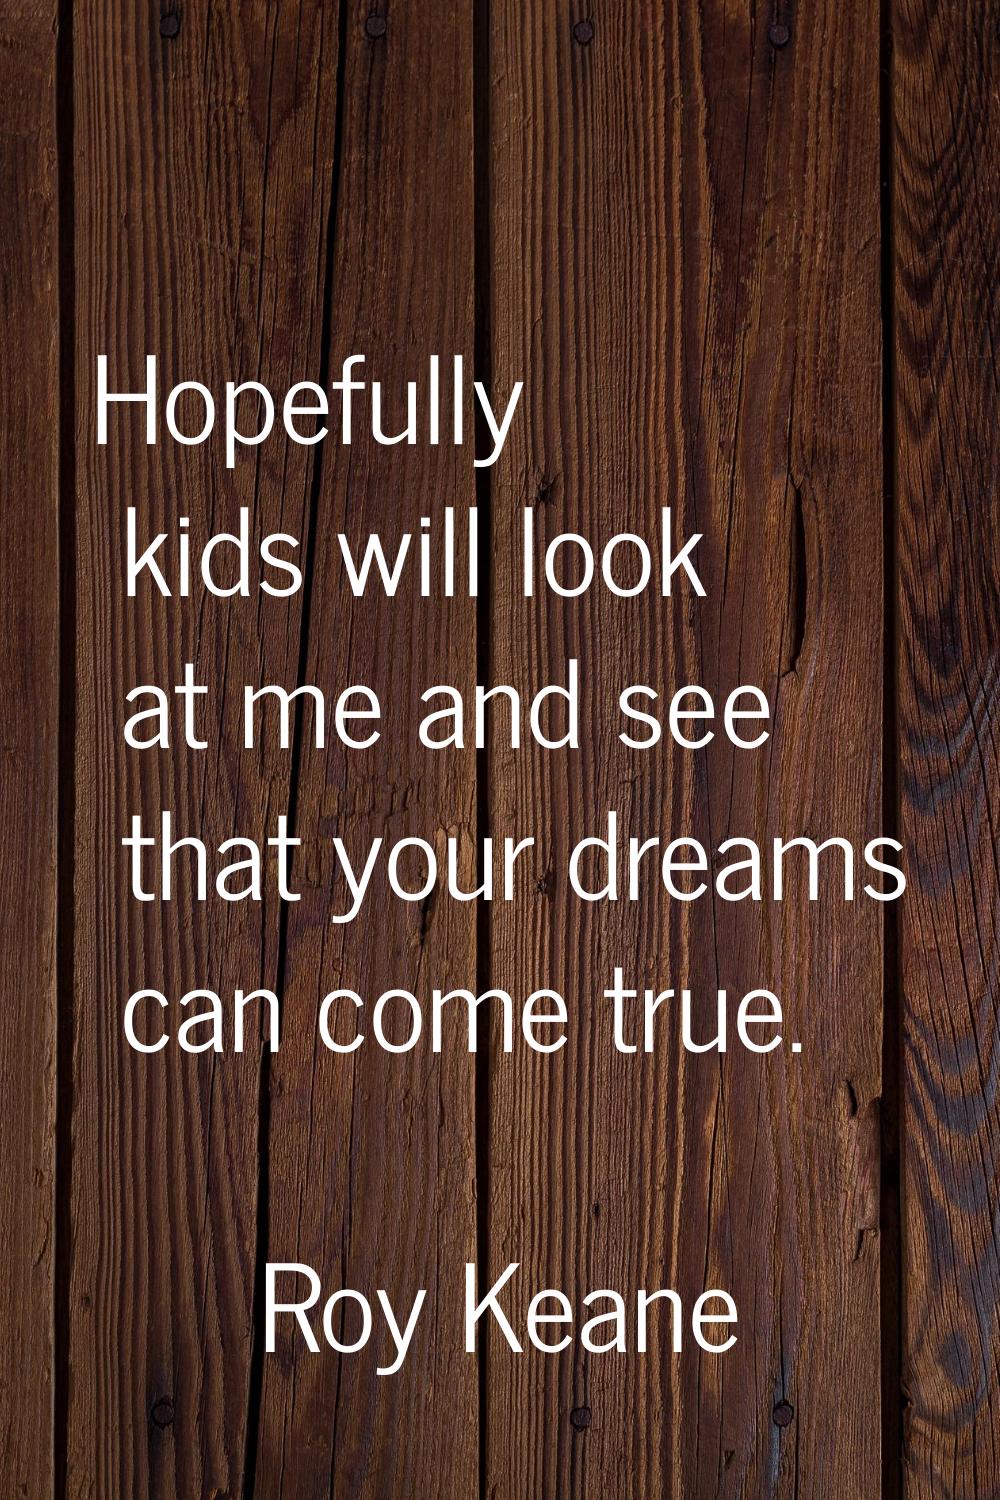 Hopefully kids will look at me and see that your dreams can come true.